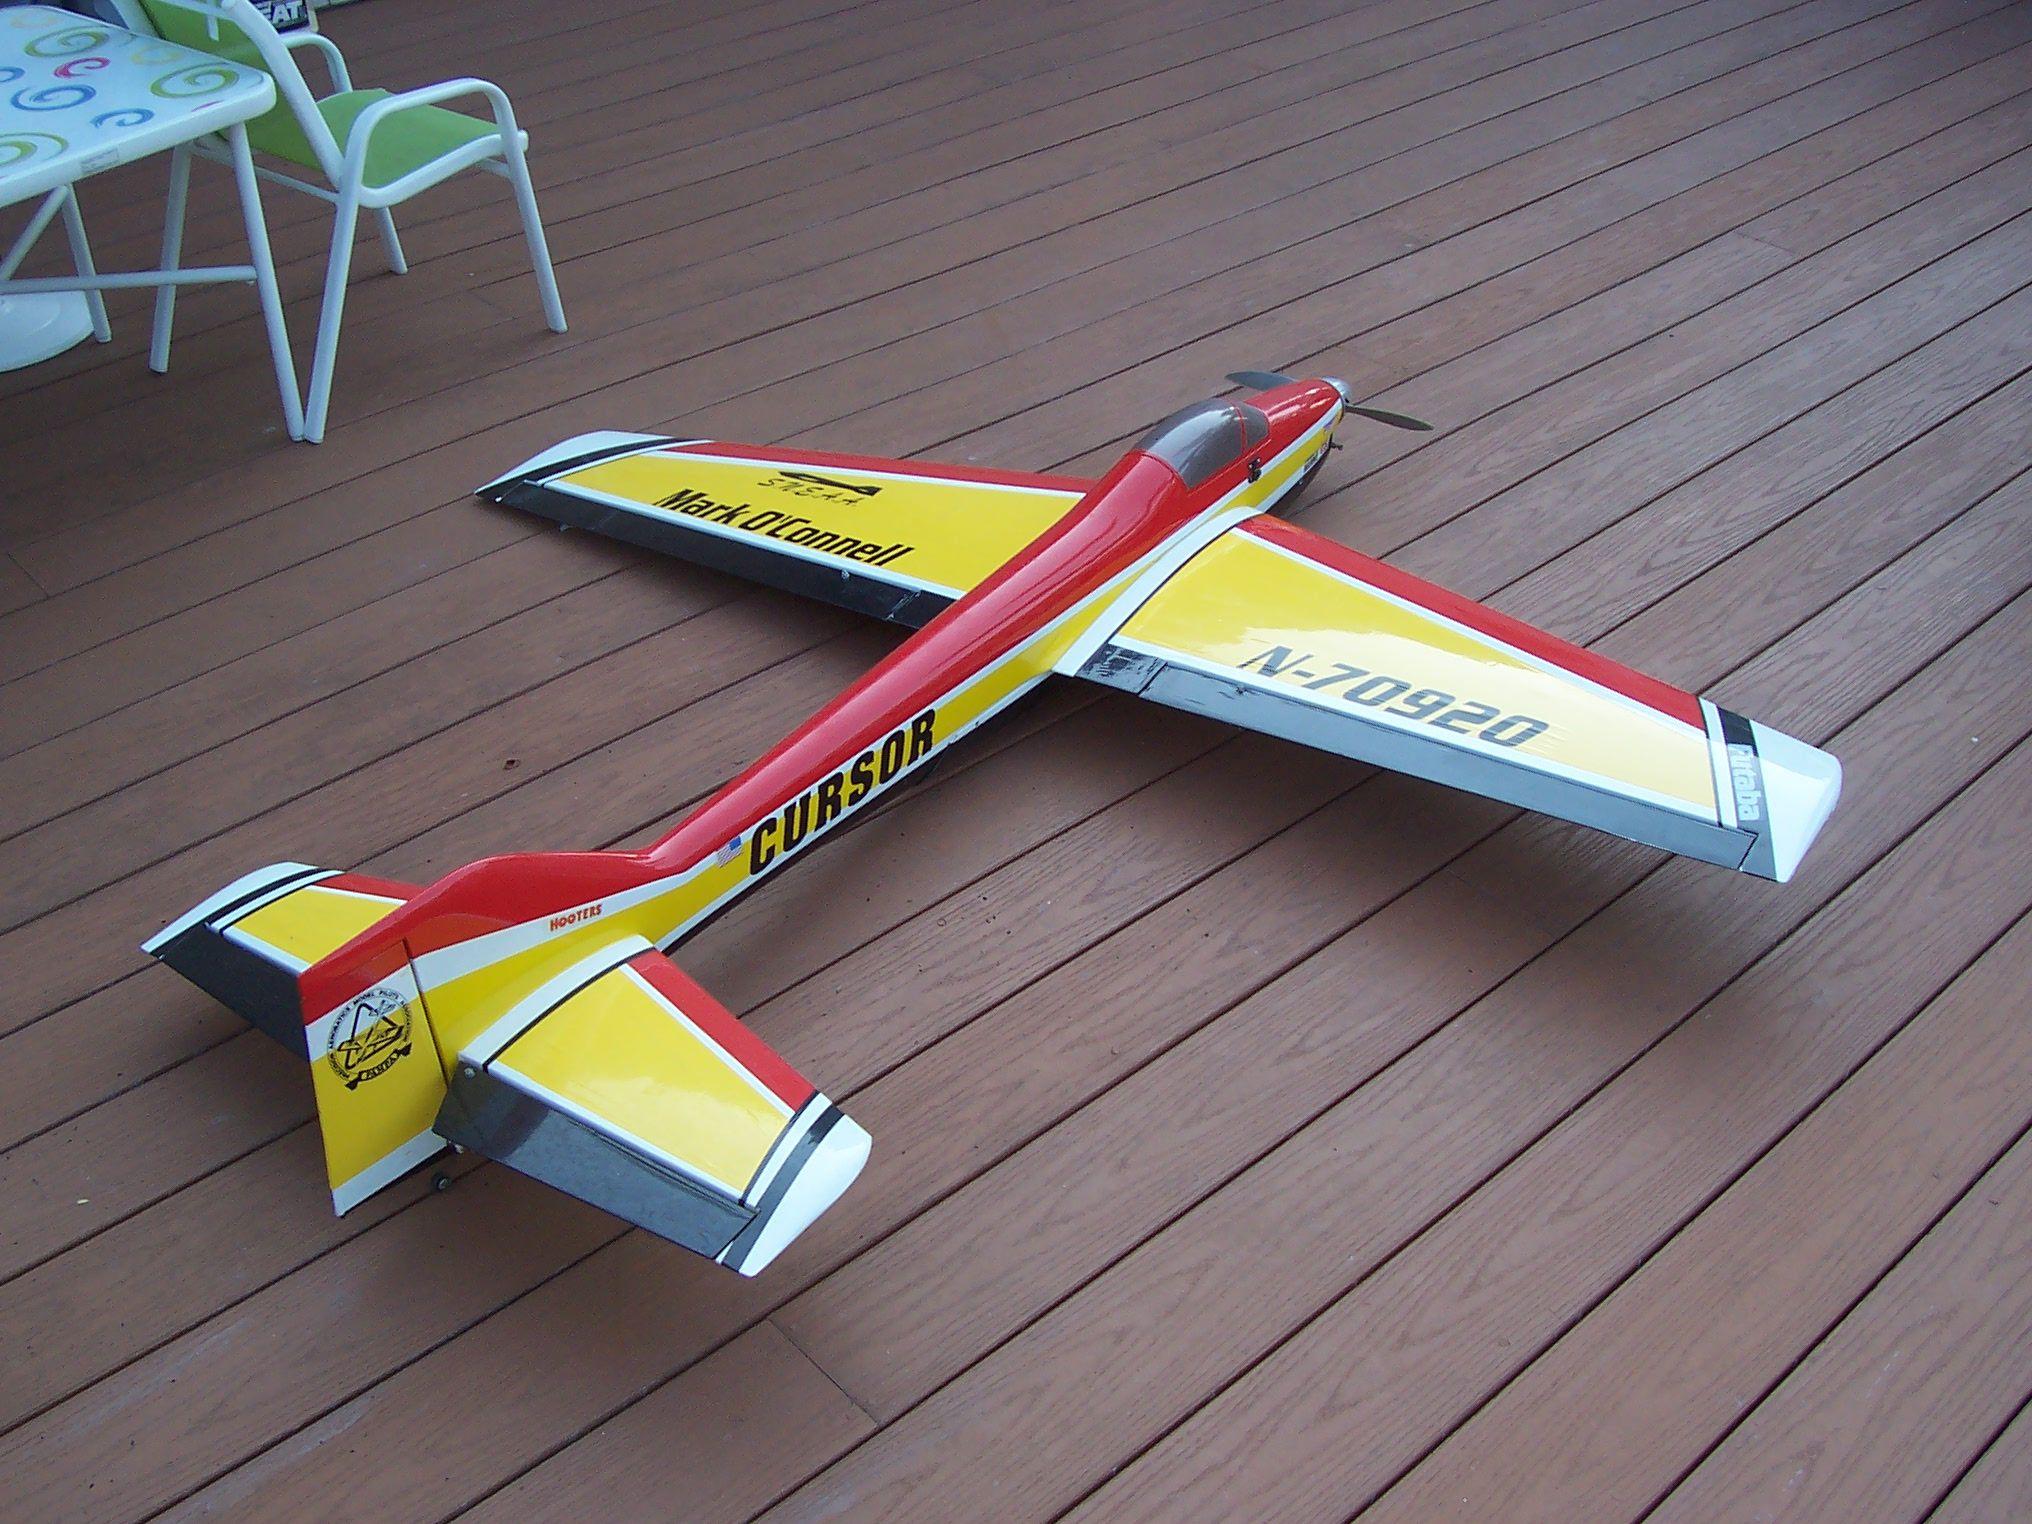 Vintage Rc Pattern Planes: Building and Preserving Vintage RC Pattern Planes